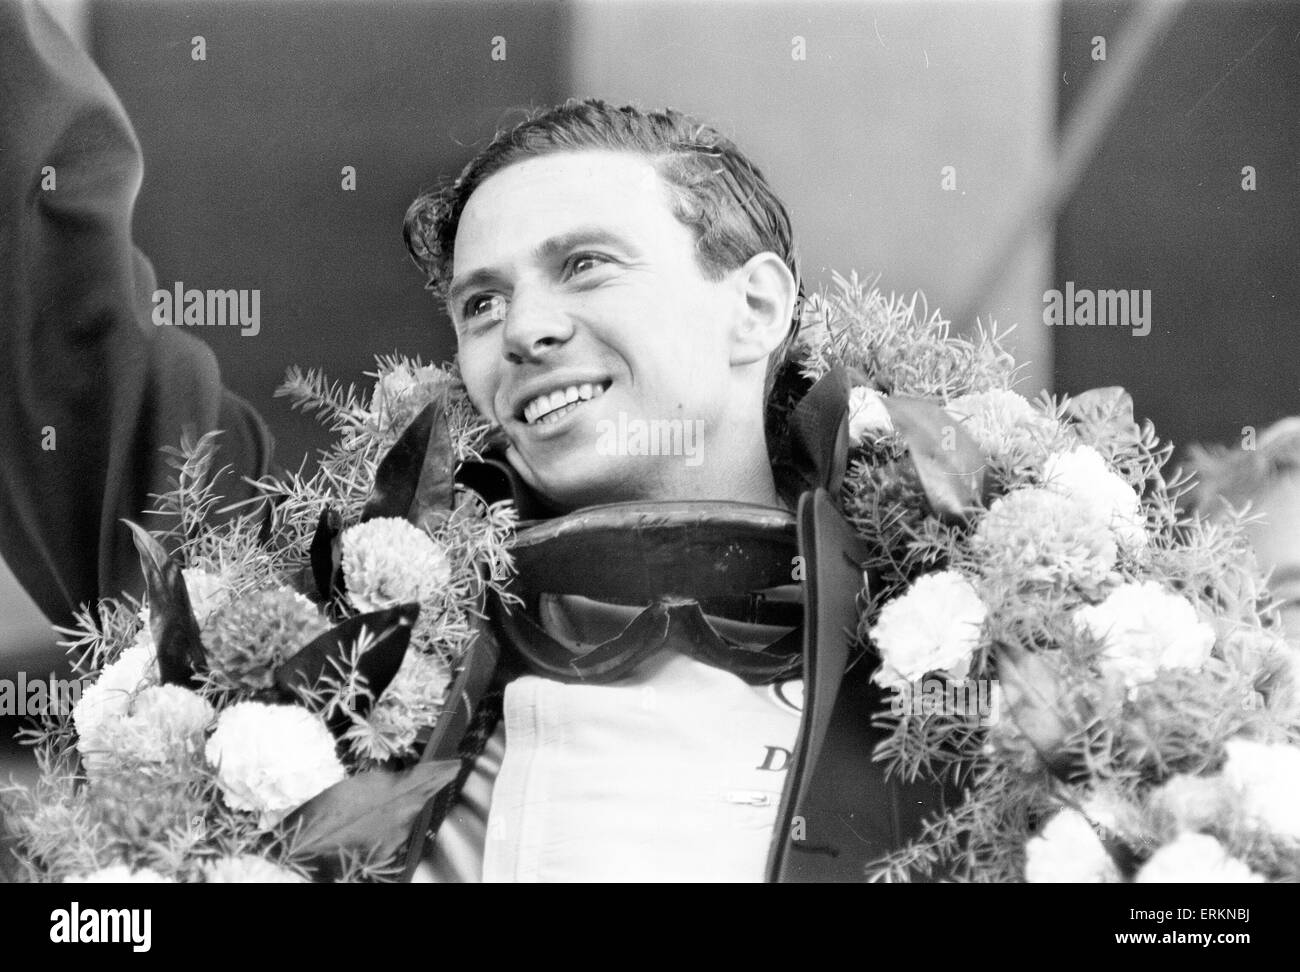 Jim Clark, British Formula One racing driver for Lotus-Climax, pictured celebrating after winning British Grand Prix at Brands Hatch, 10th July 1964. Stock Photo